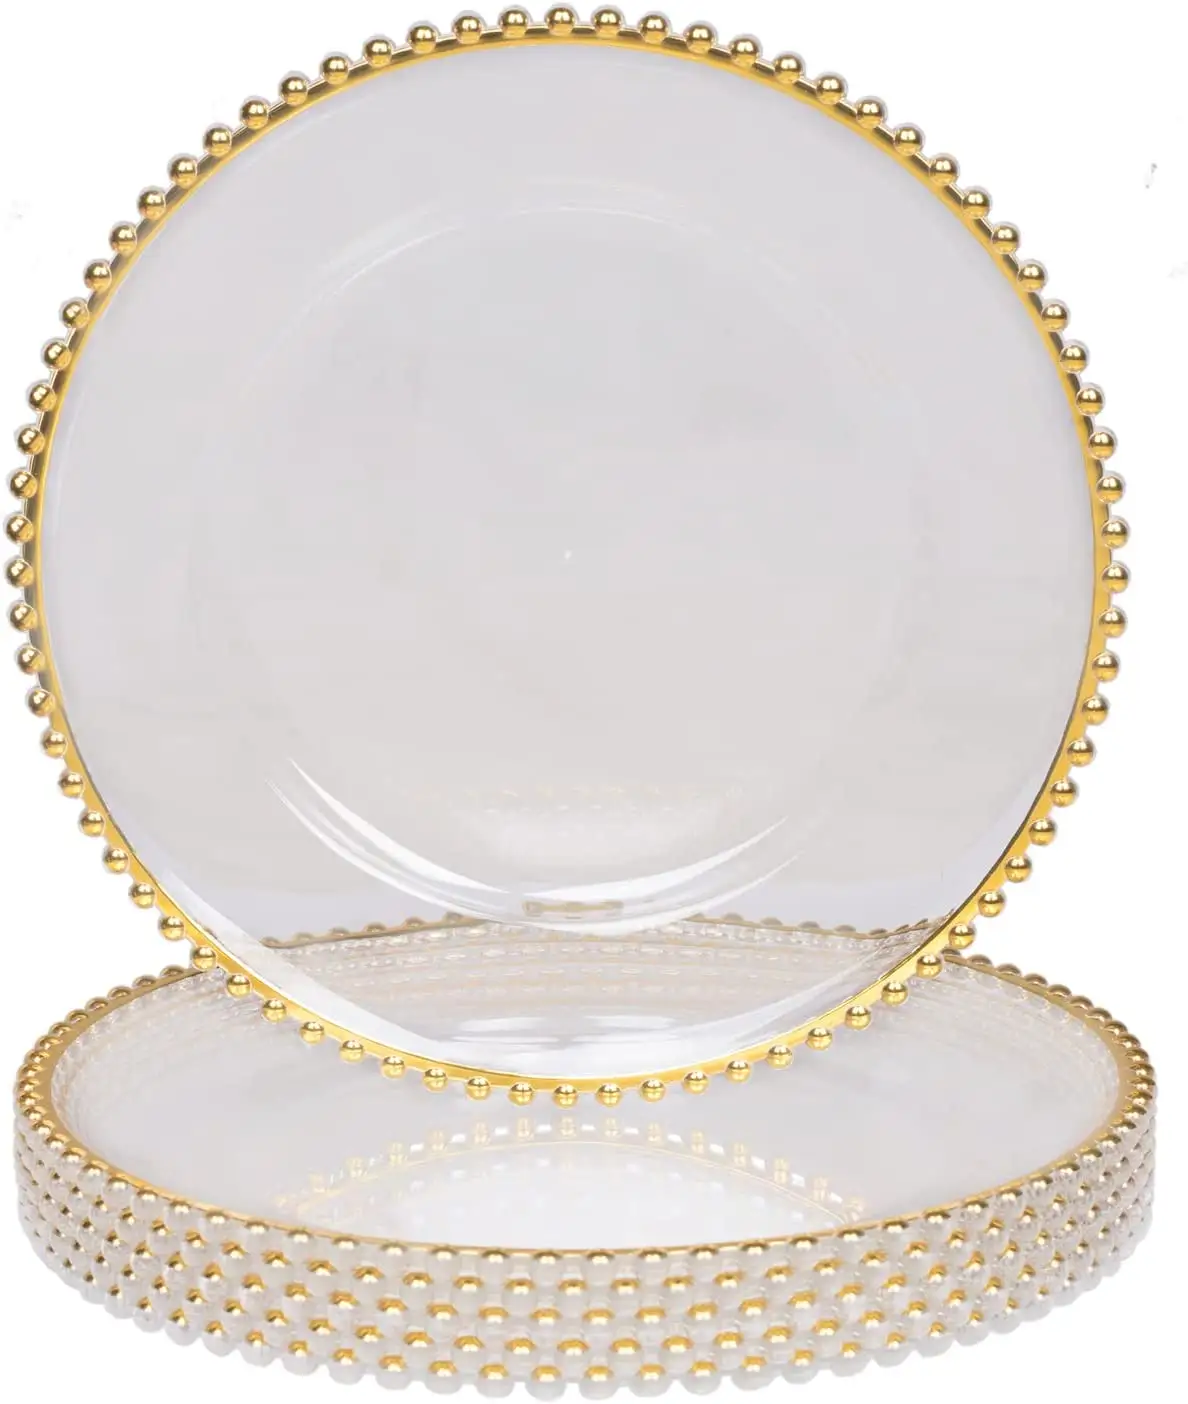 13 inch food container acrylic gold glass charger plates wedding for dinner plate